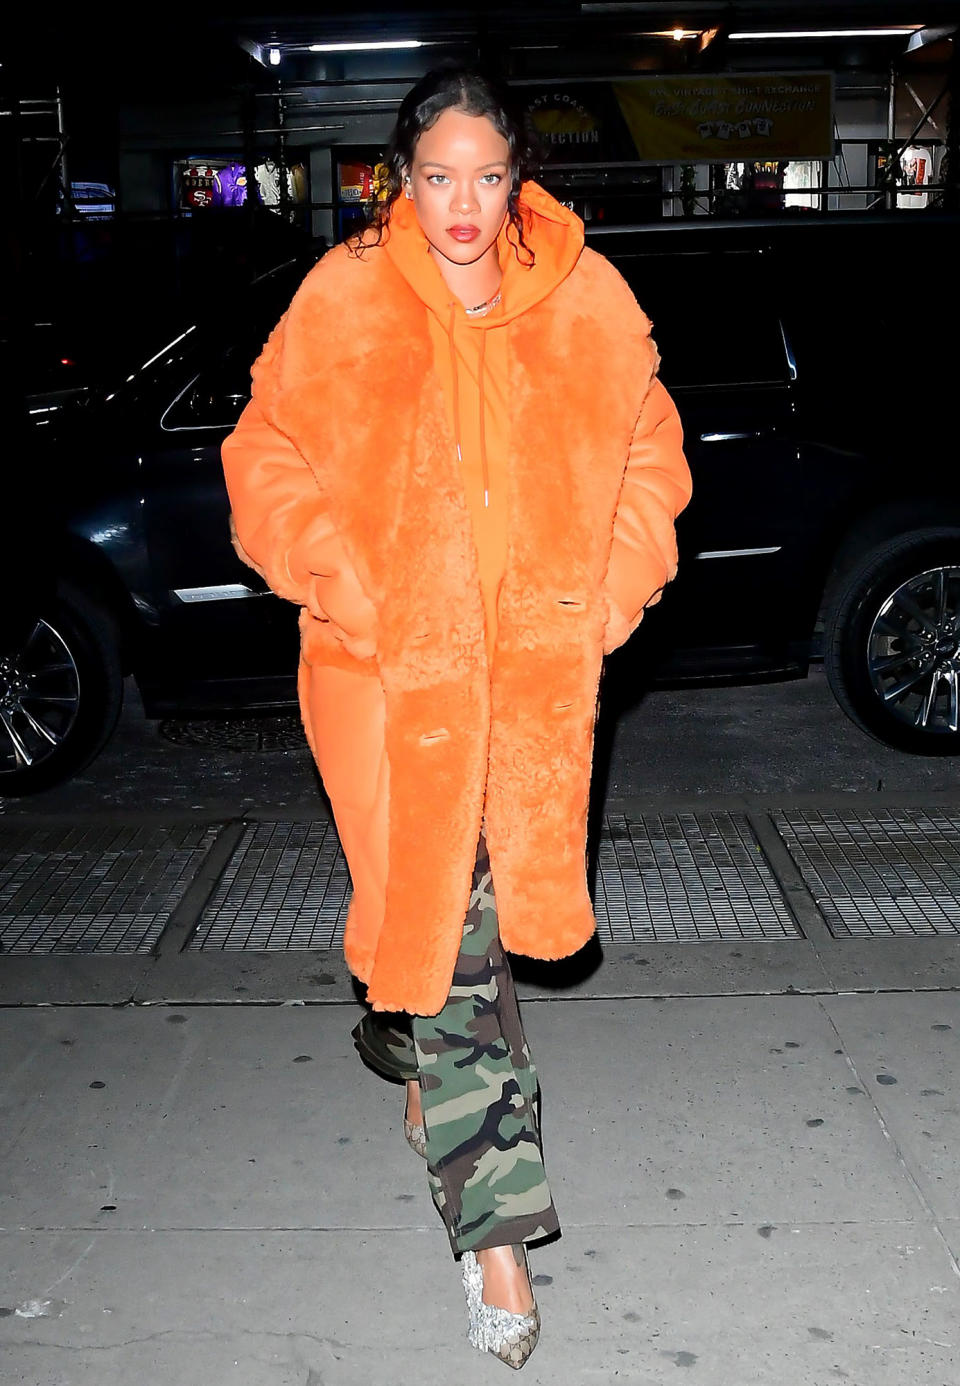 While Rihanna's pregnancy was under wraps at the time, she made a fashion-forward statement in a Jean Paul Gaultier orange coat.